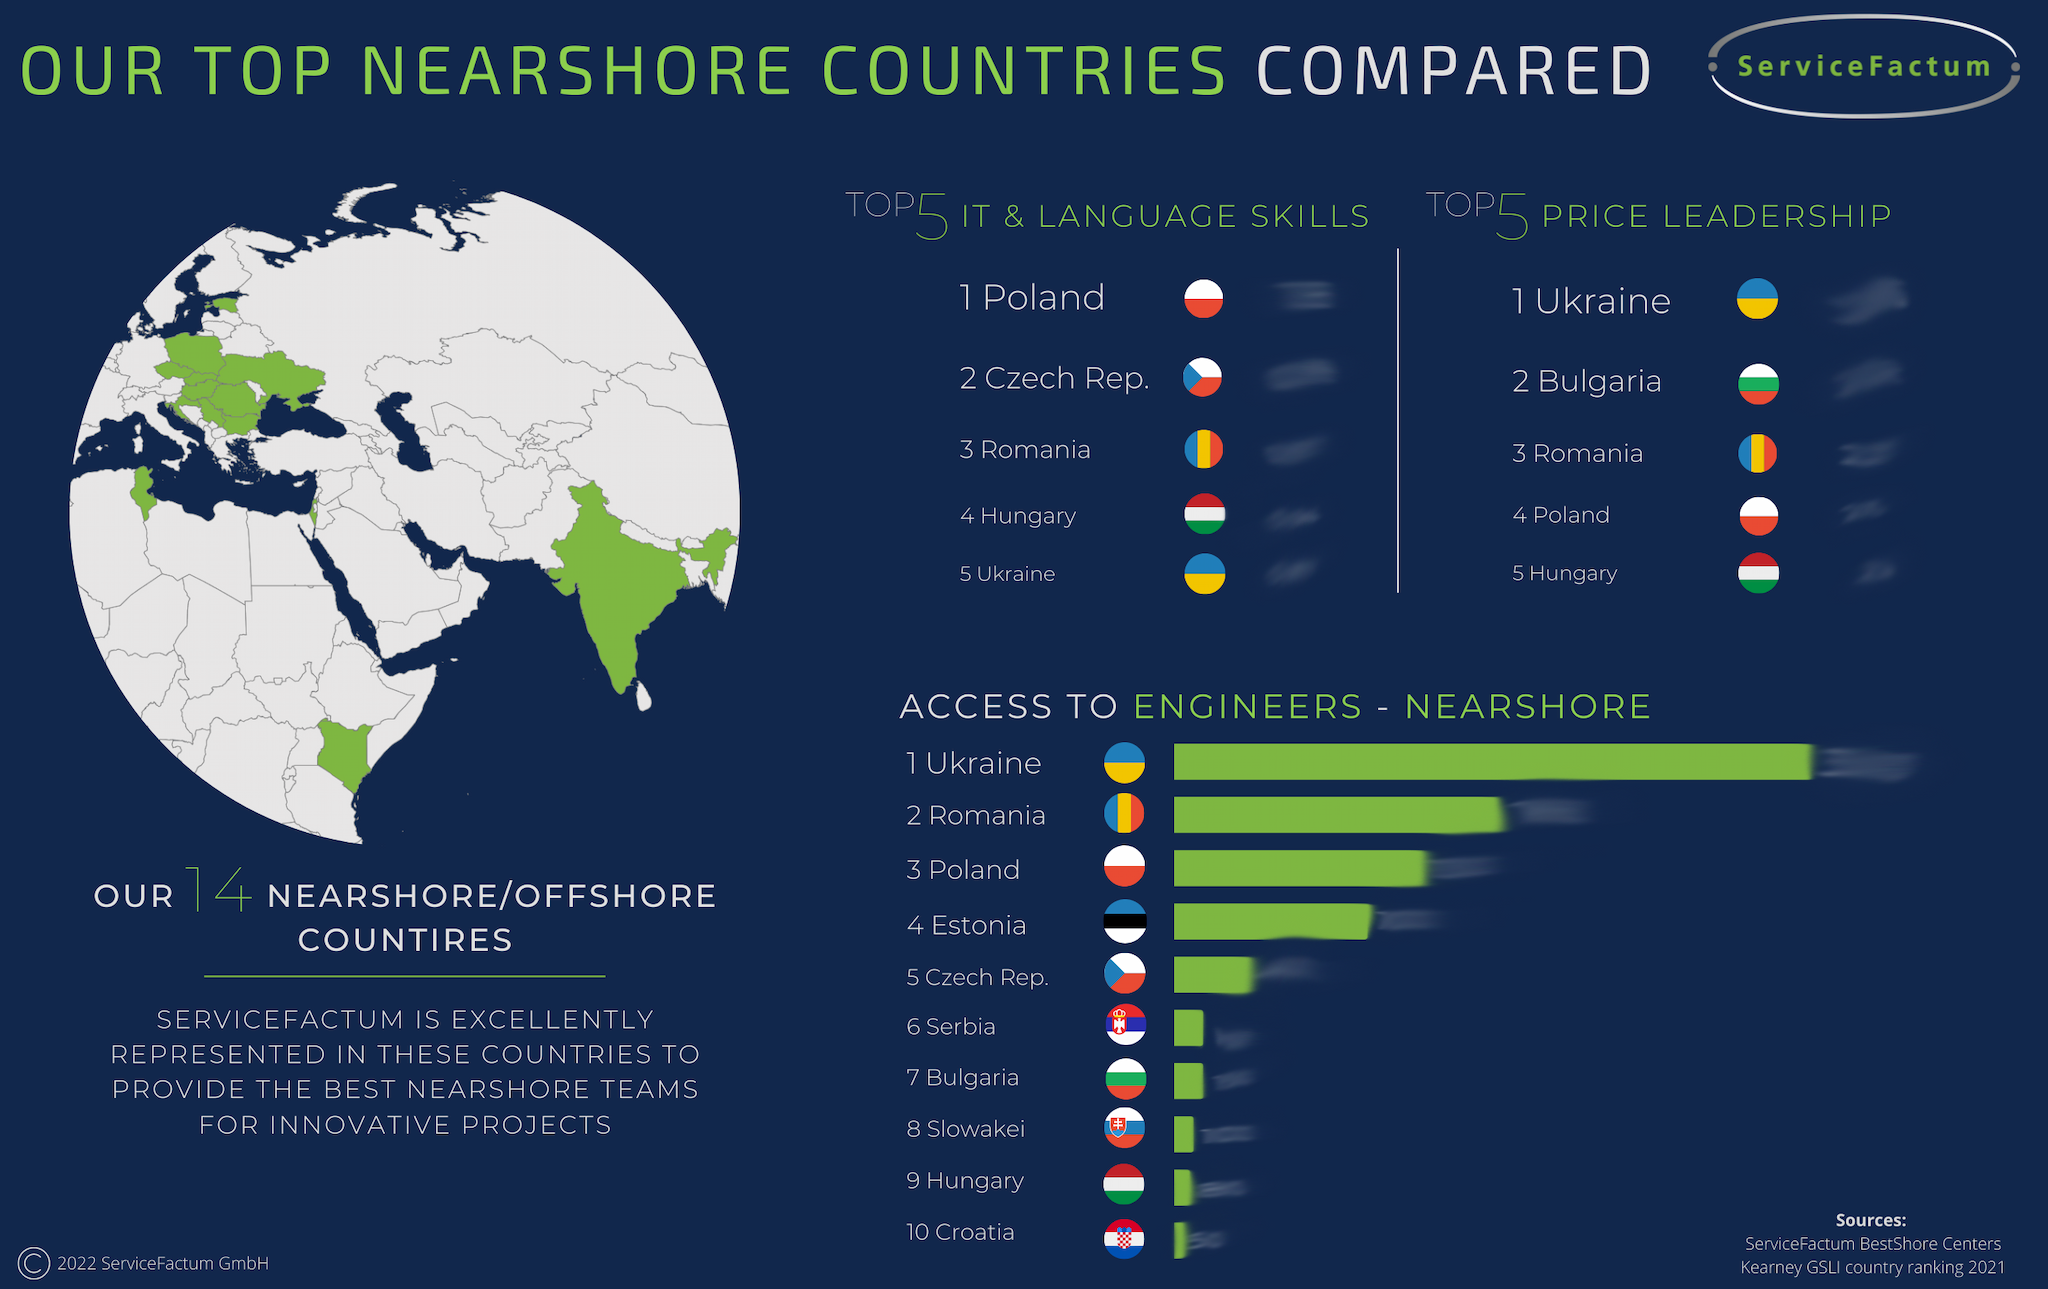 Teaser_Our Top Nearshore Countries compared